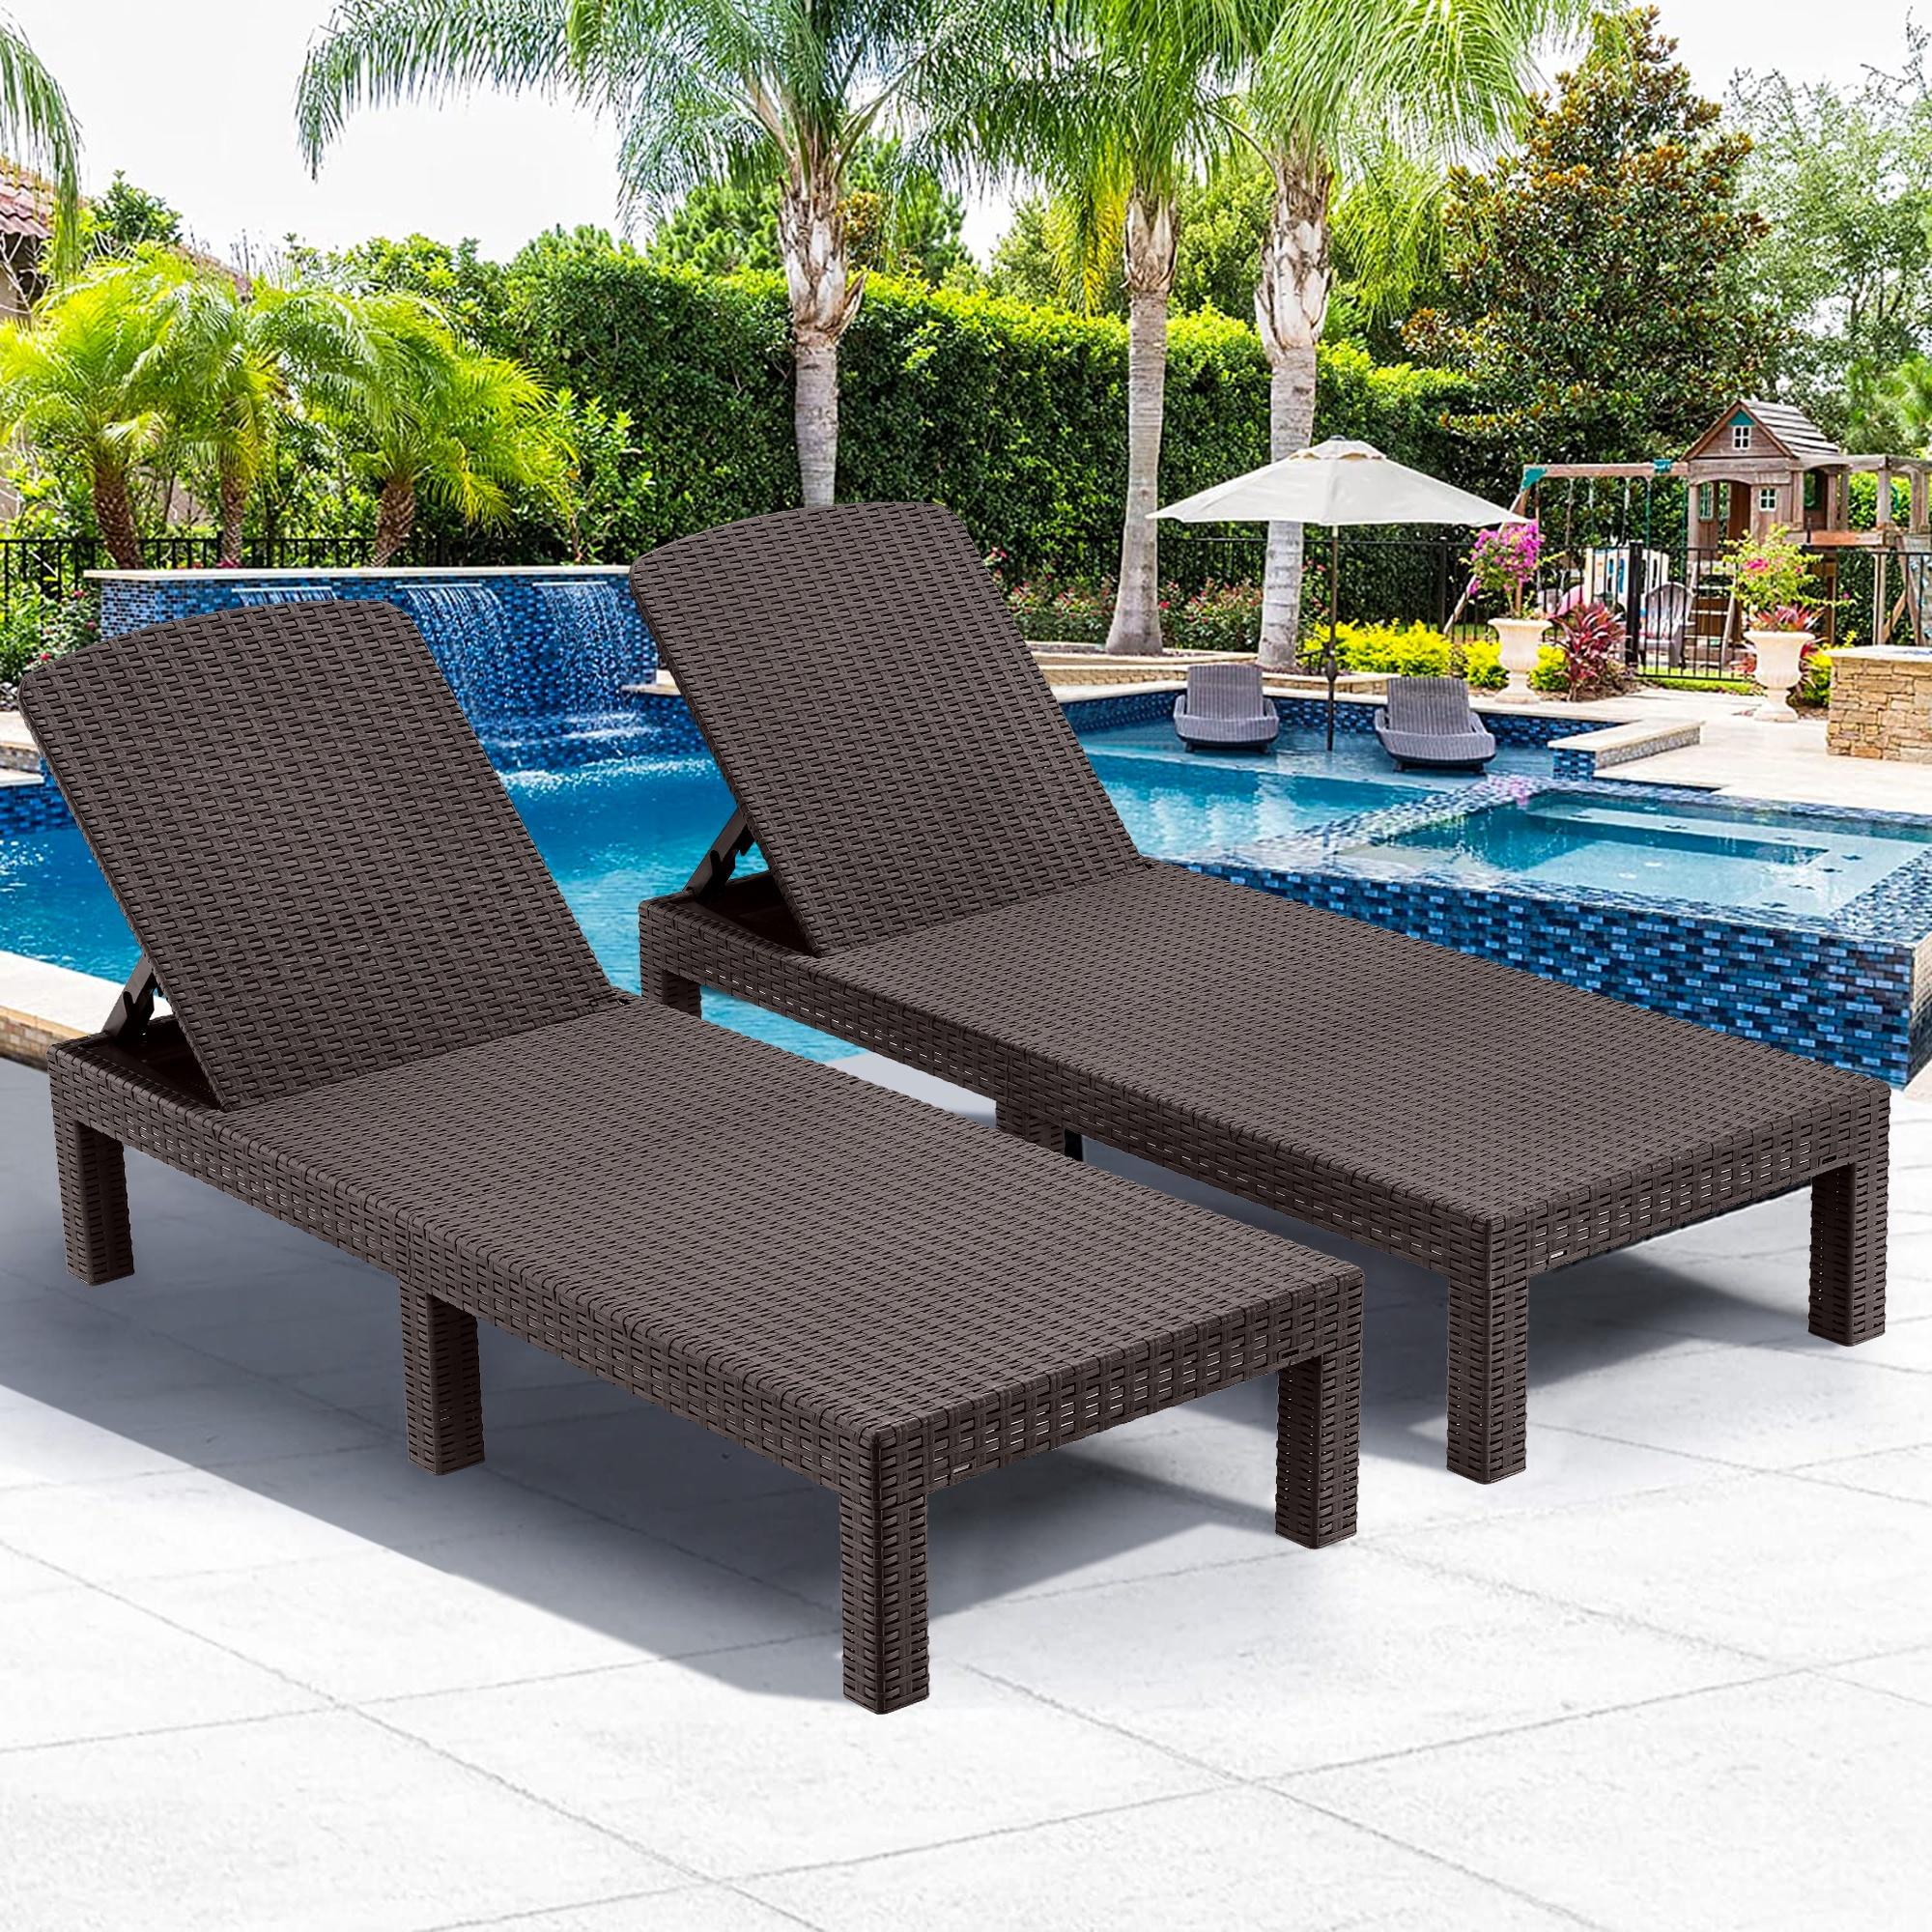 2 Piece Outdoor Chaise Lounge Set, PP Resin Adjustable Reclining Lounge Chairs, Patio Sun Loungers for Poolside Porch Backyard Garden, Espresso - image 1 of 10